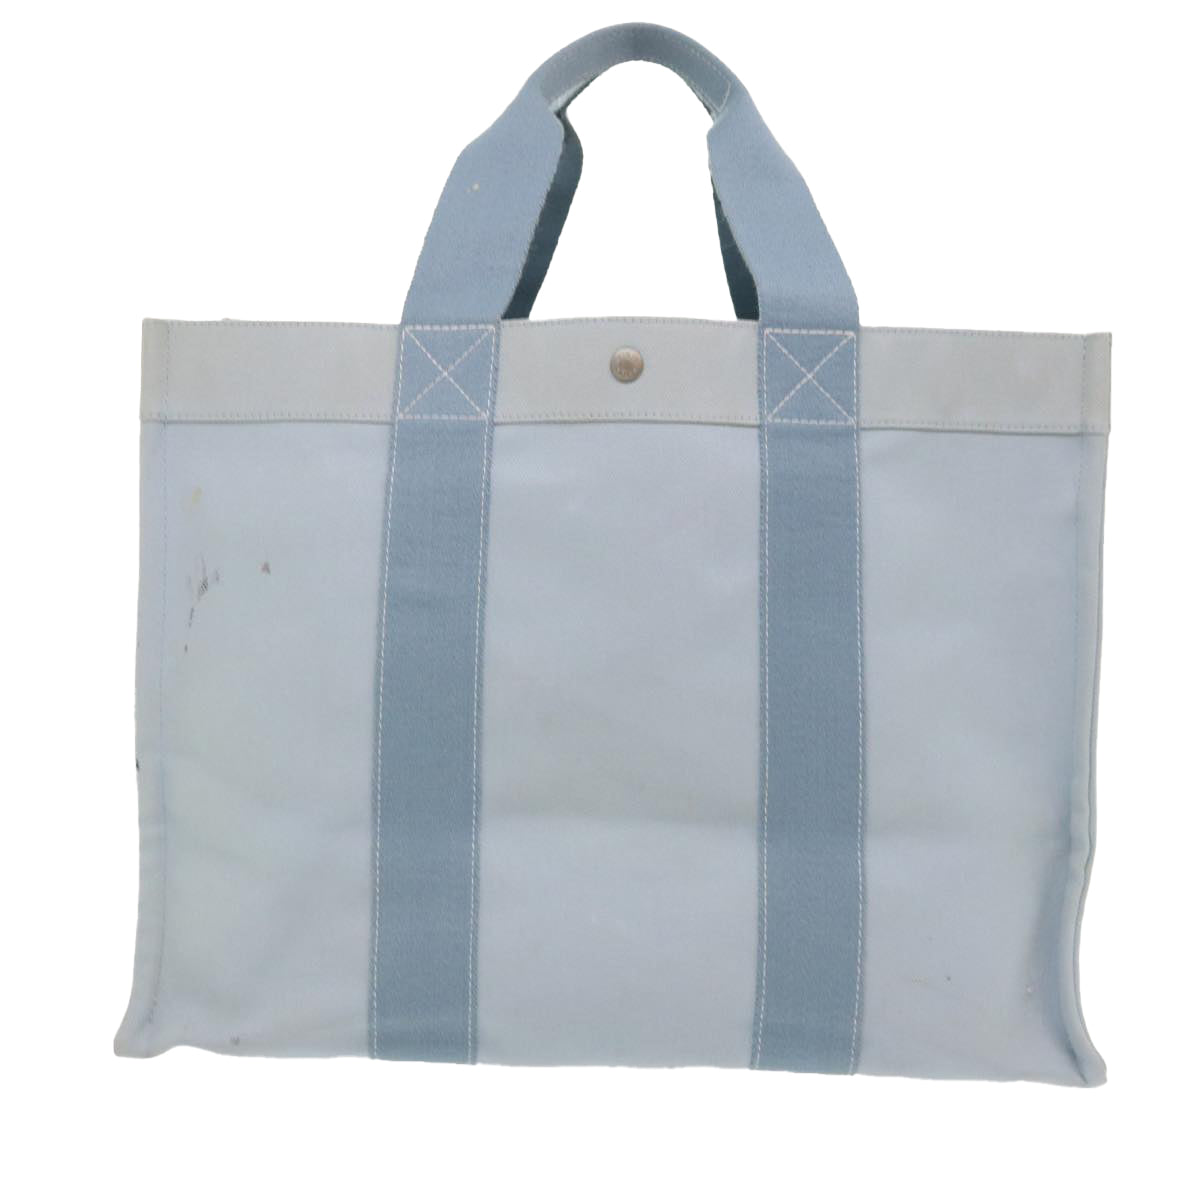 HERMES Coquillage GM Tote Bag Canvas Light Blue Auth 46966